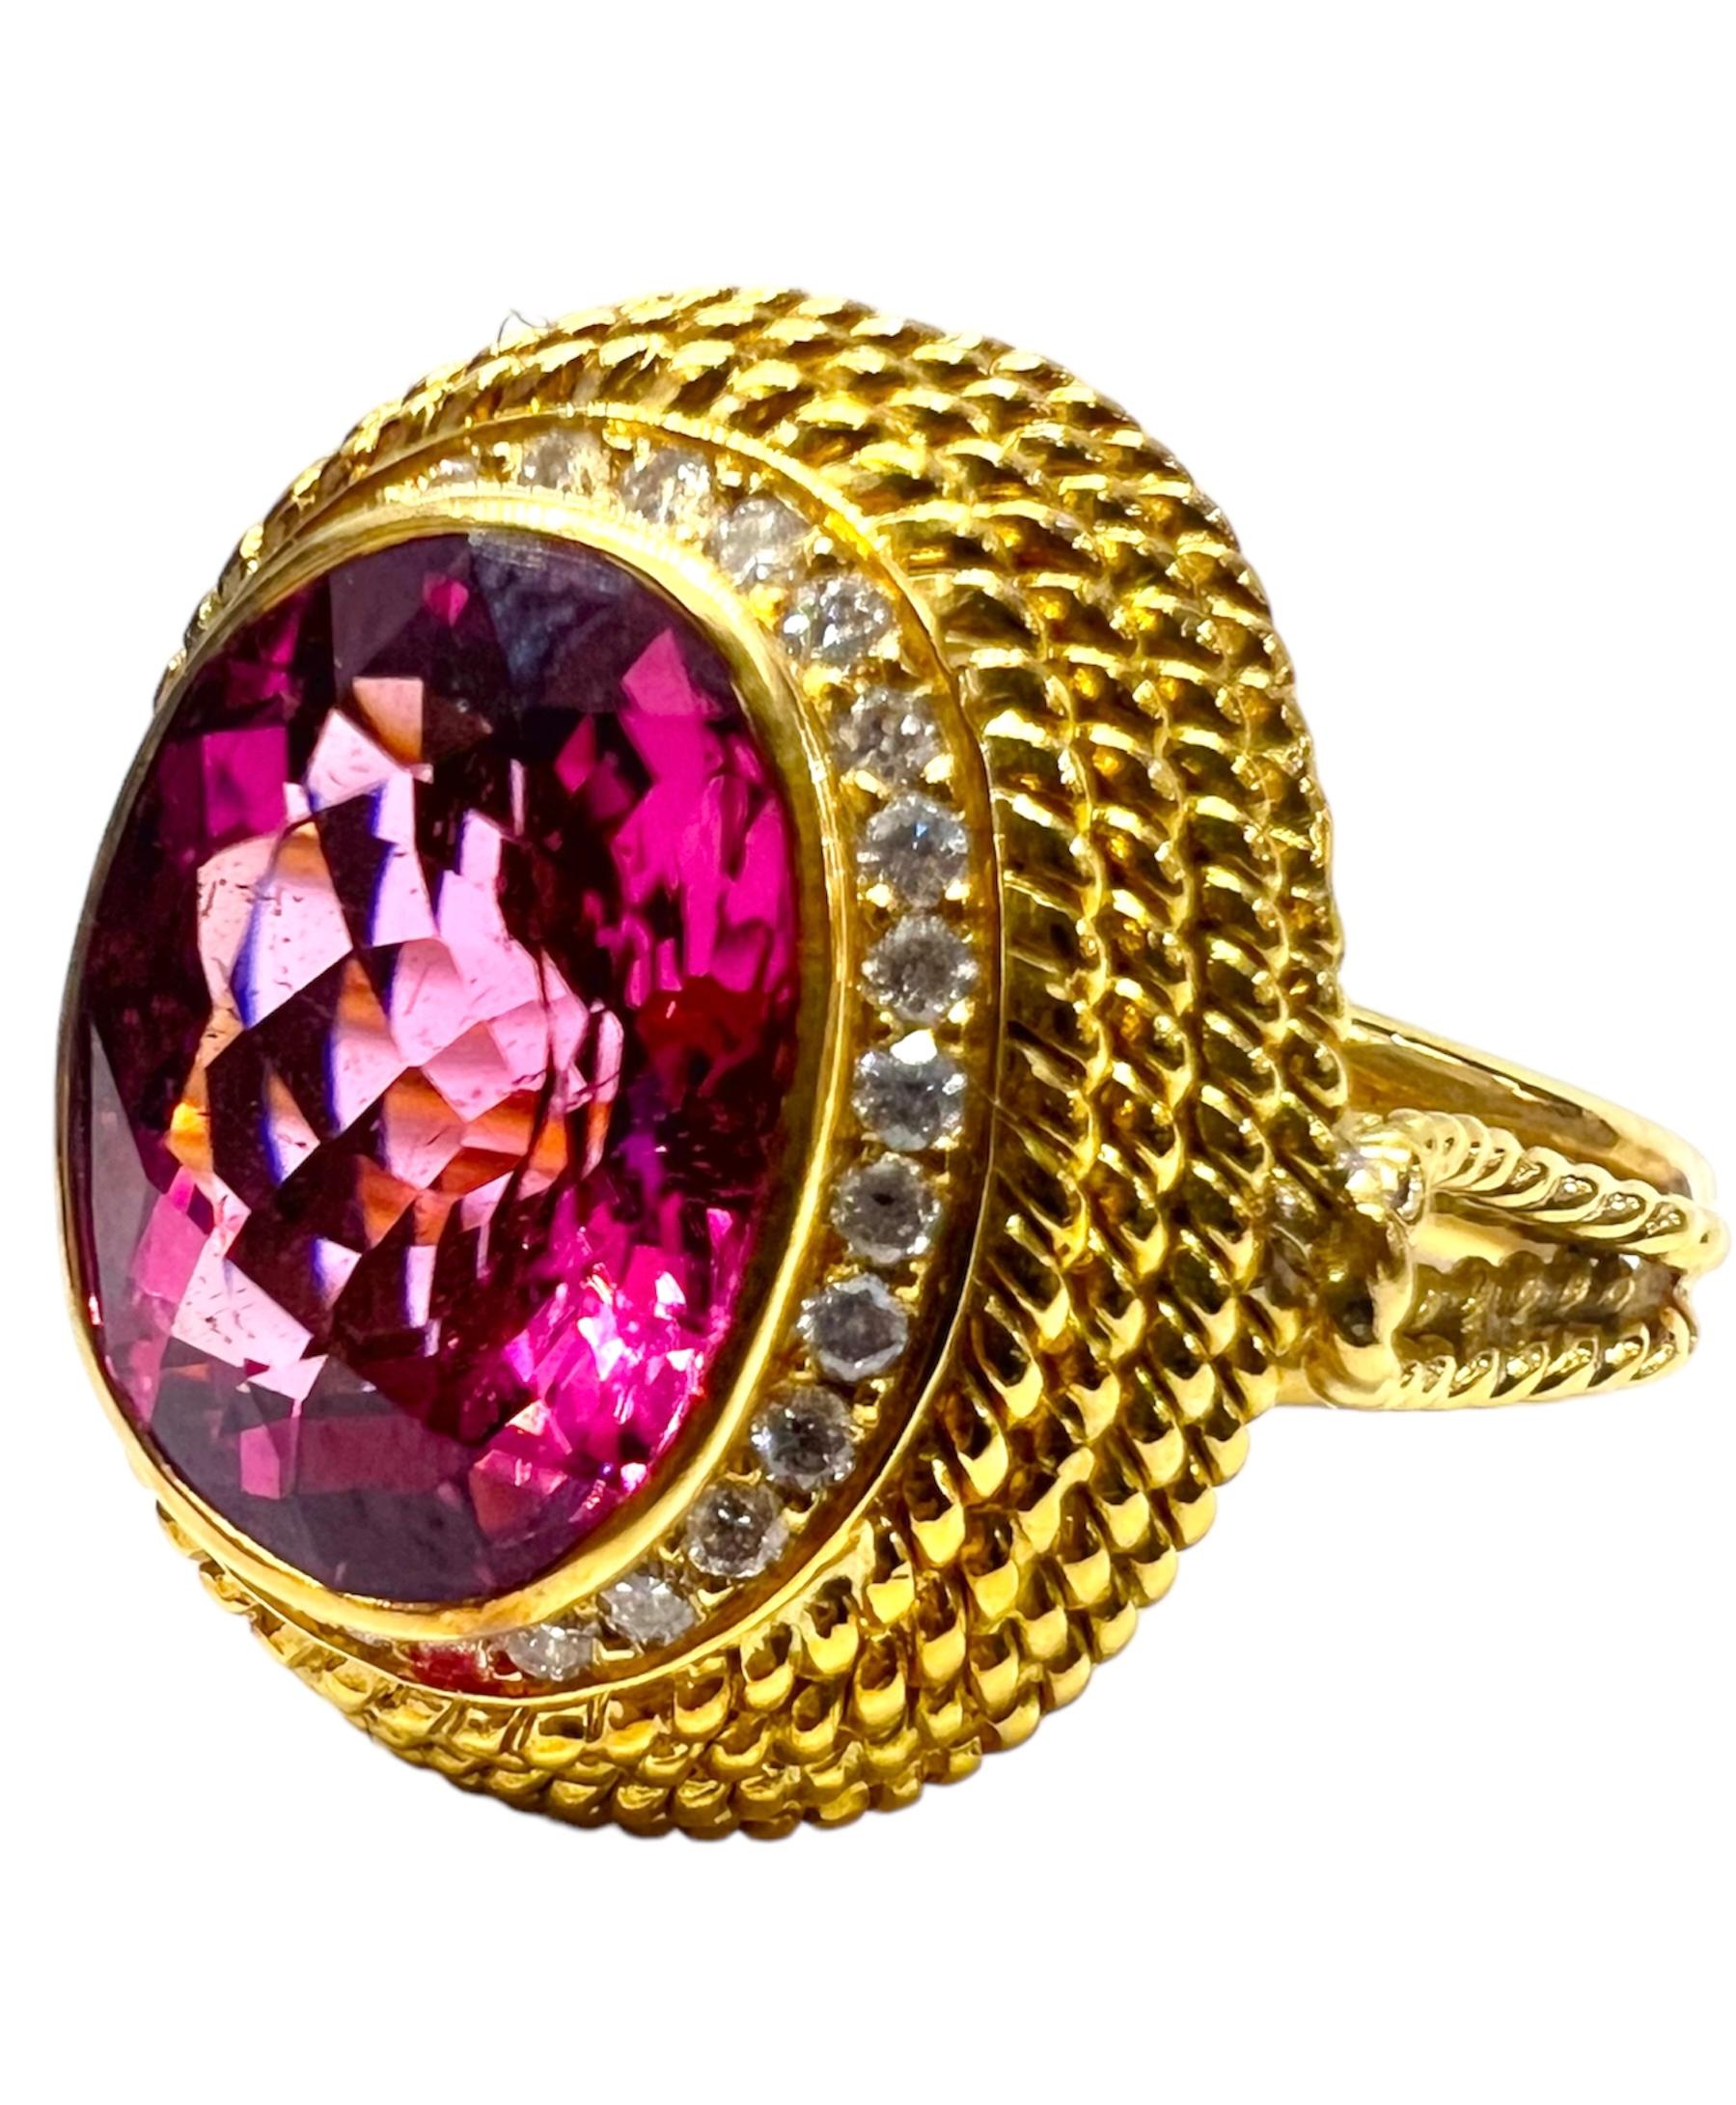 18K yellow gold ring with pink tourmaline.

Sophia D by Joseph Dardashti LTD has been known worldwide for 35 years and are inspired by classic Art Deco design that merges with modern manufacturing techniques.